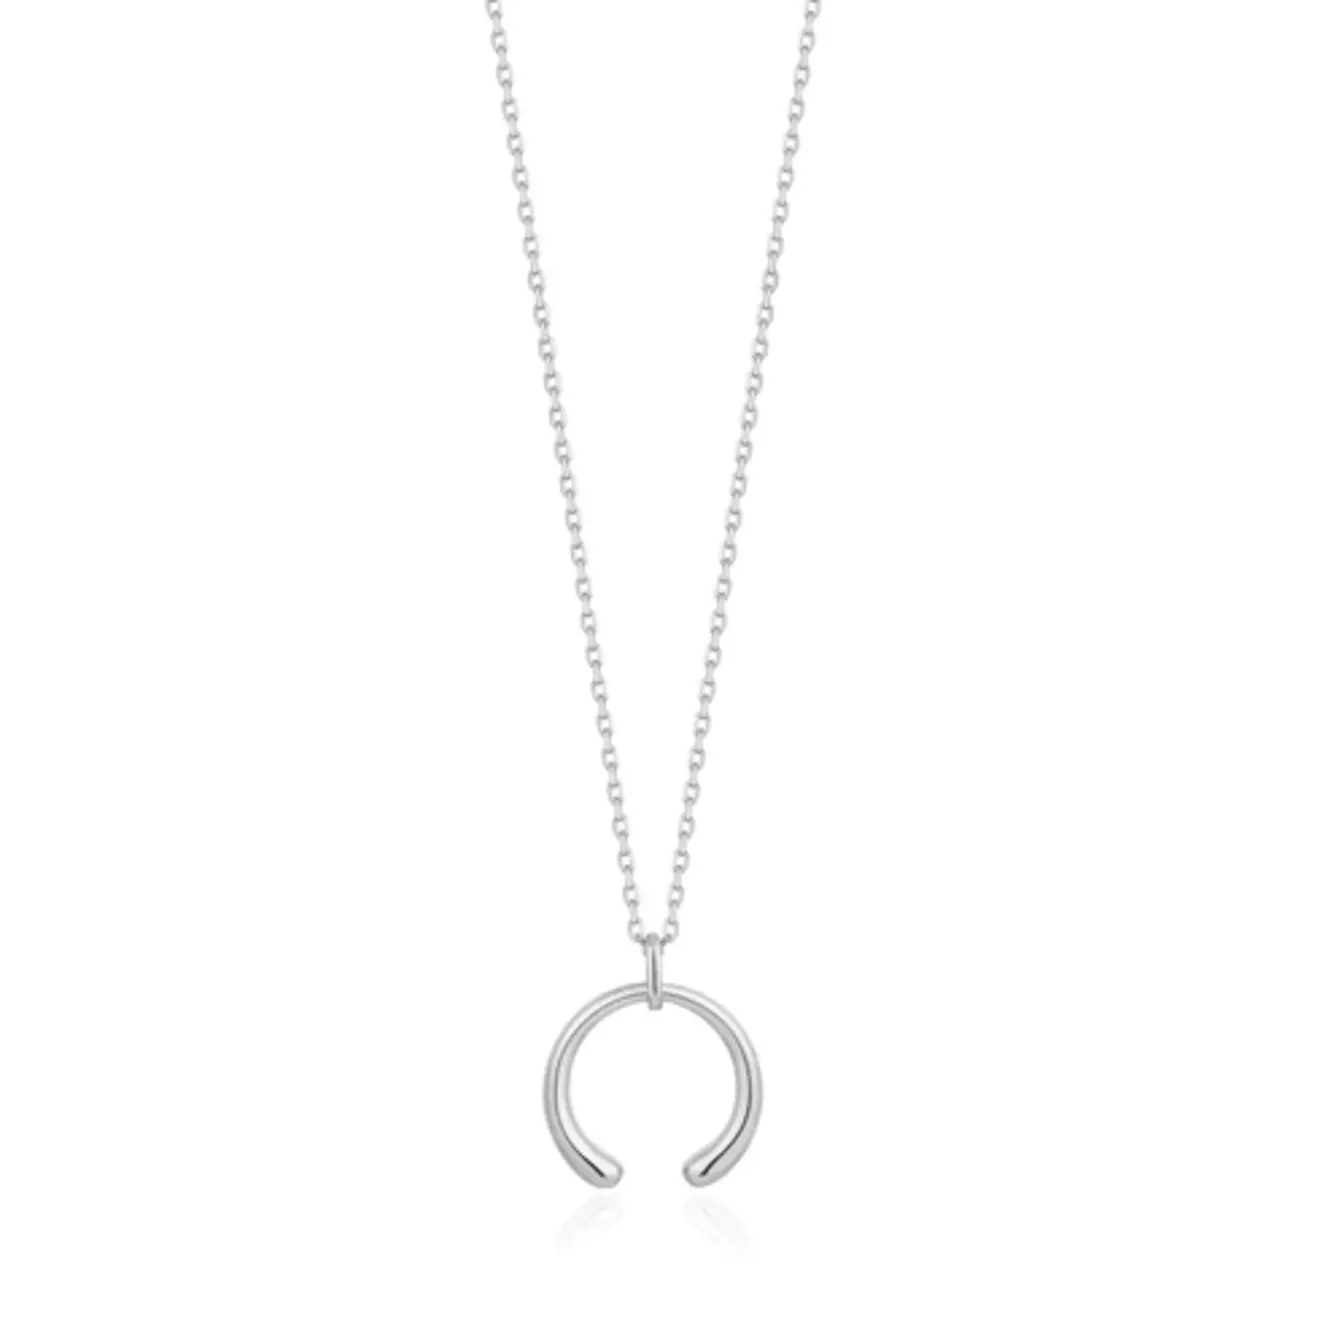 Luxe Minimalism luxe curve ketting (Zilver of goud)